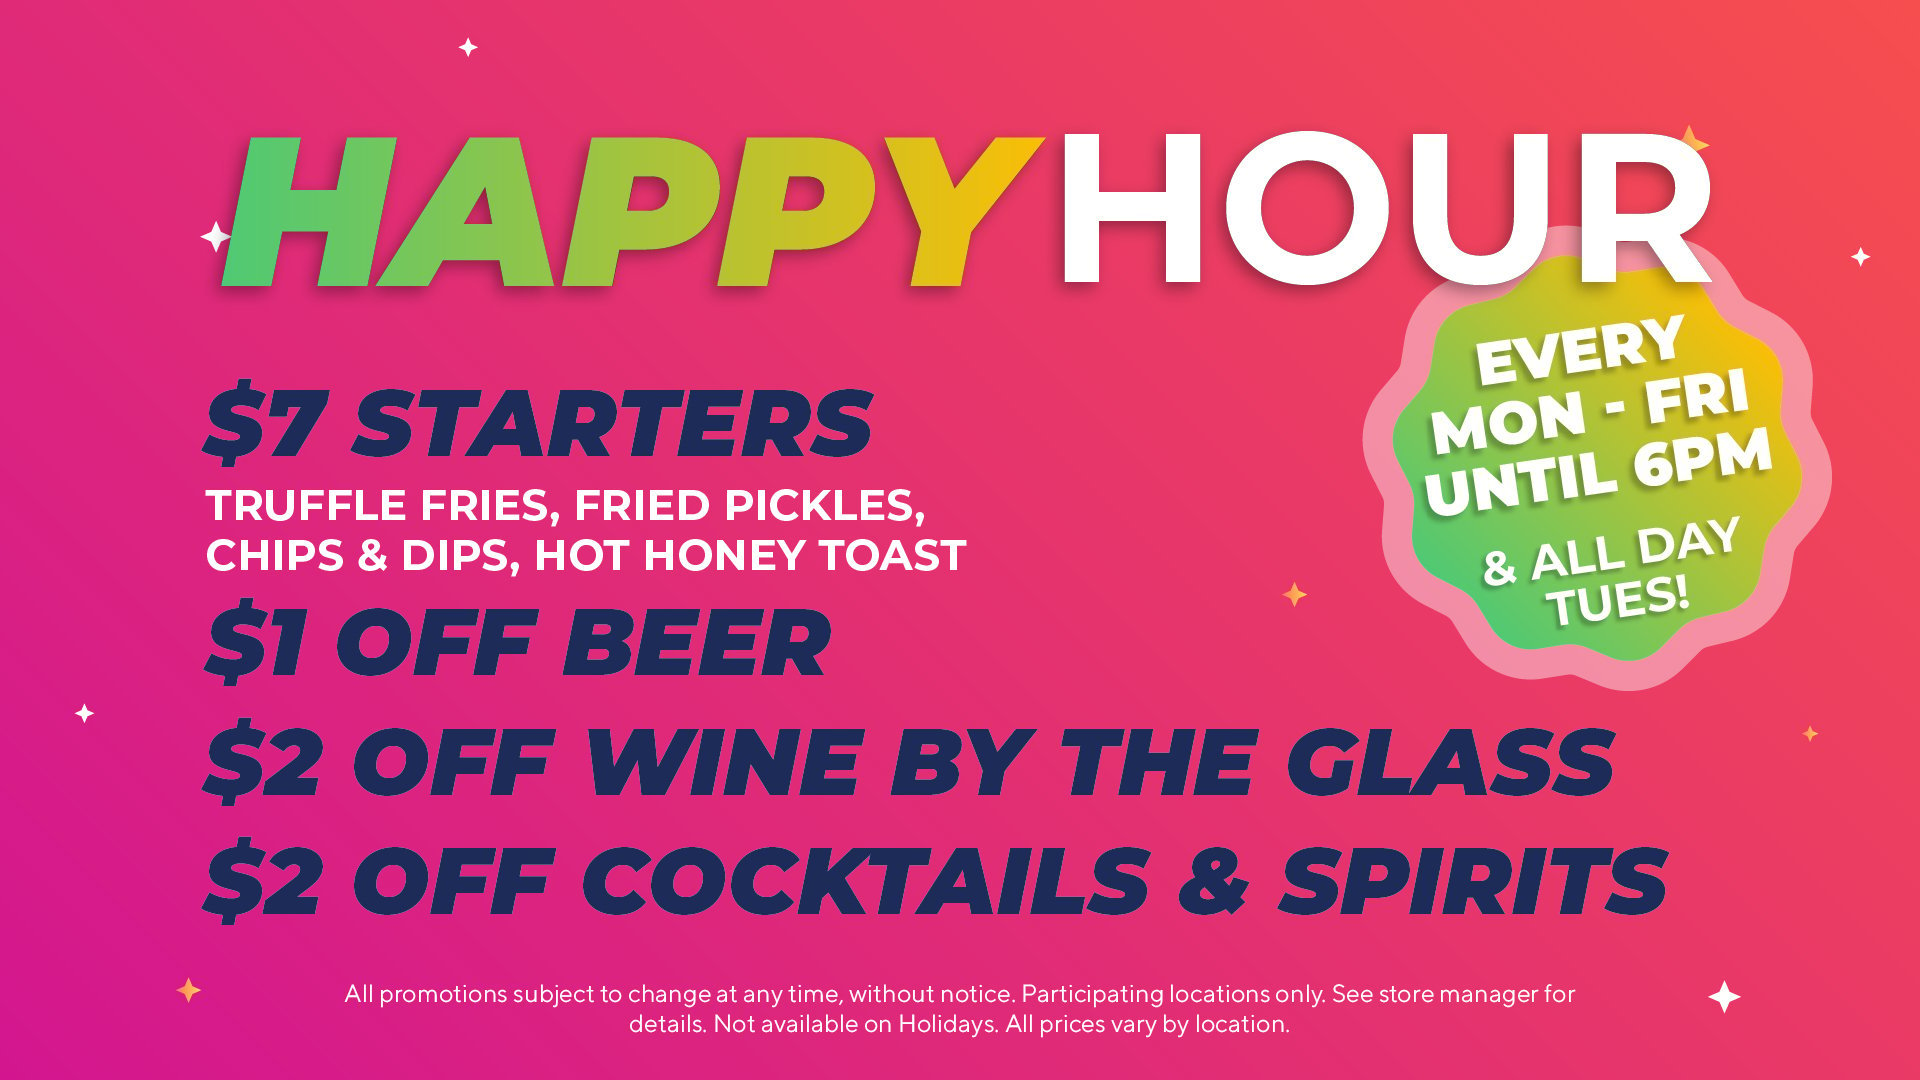 Happy Hour Every Mon-Friday until 6PM